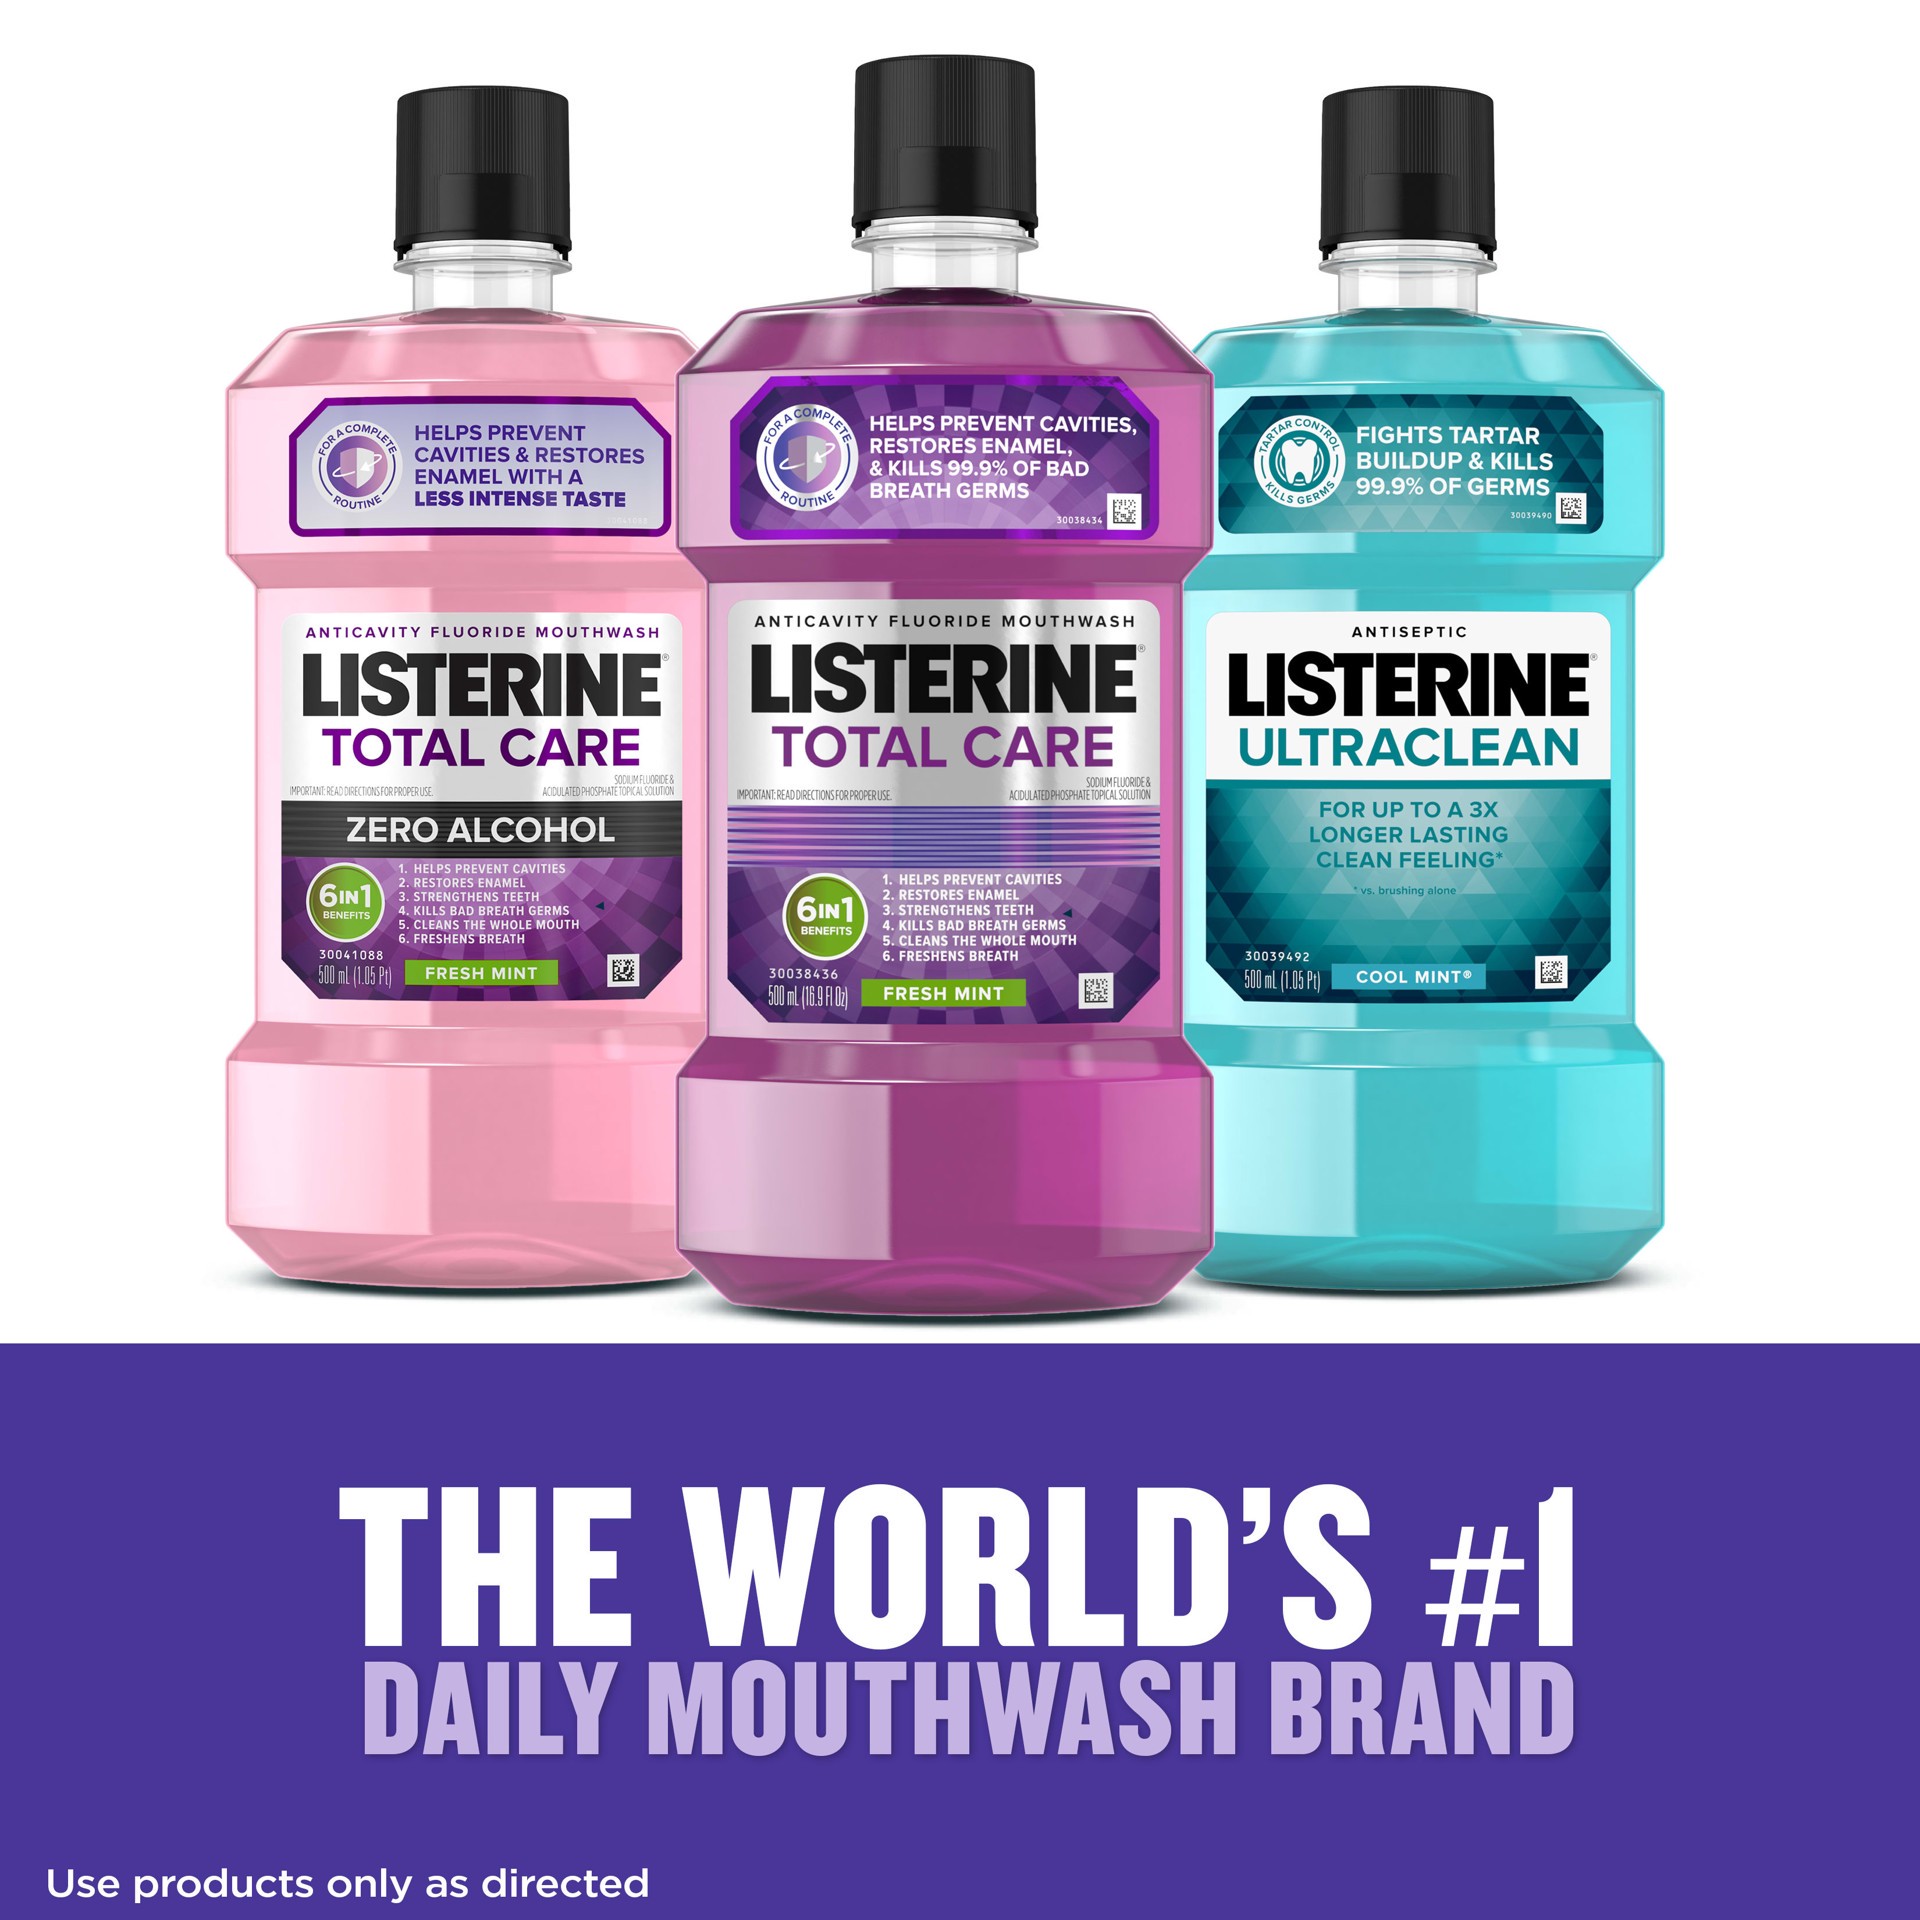 slide 2 of 10, Listerine Total Care Anticavity Fluoride Mouthwash, 6 Benefits in 1 Oral Rinse Helps Kill 99% of Bad Breath Germs, Prevents Cavities, Strengthens Teeth, ADA-Accepted, Fresh Mint, 1 L, 1 L